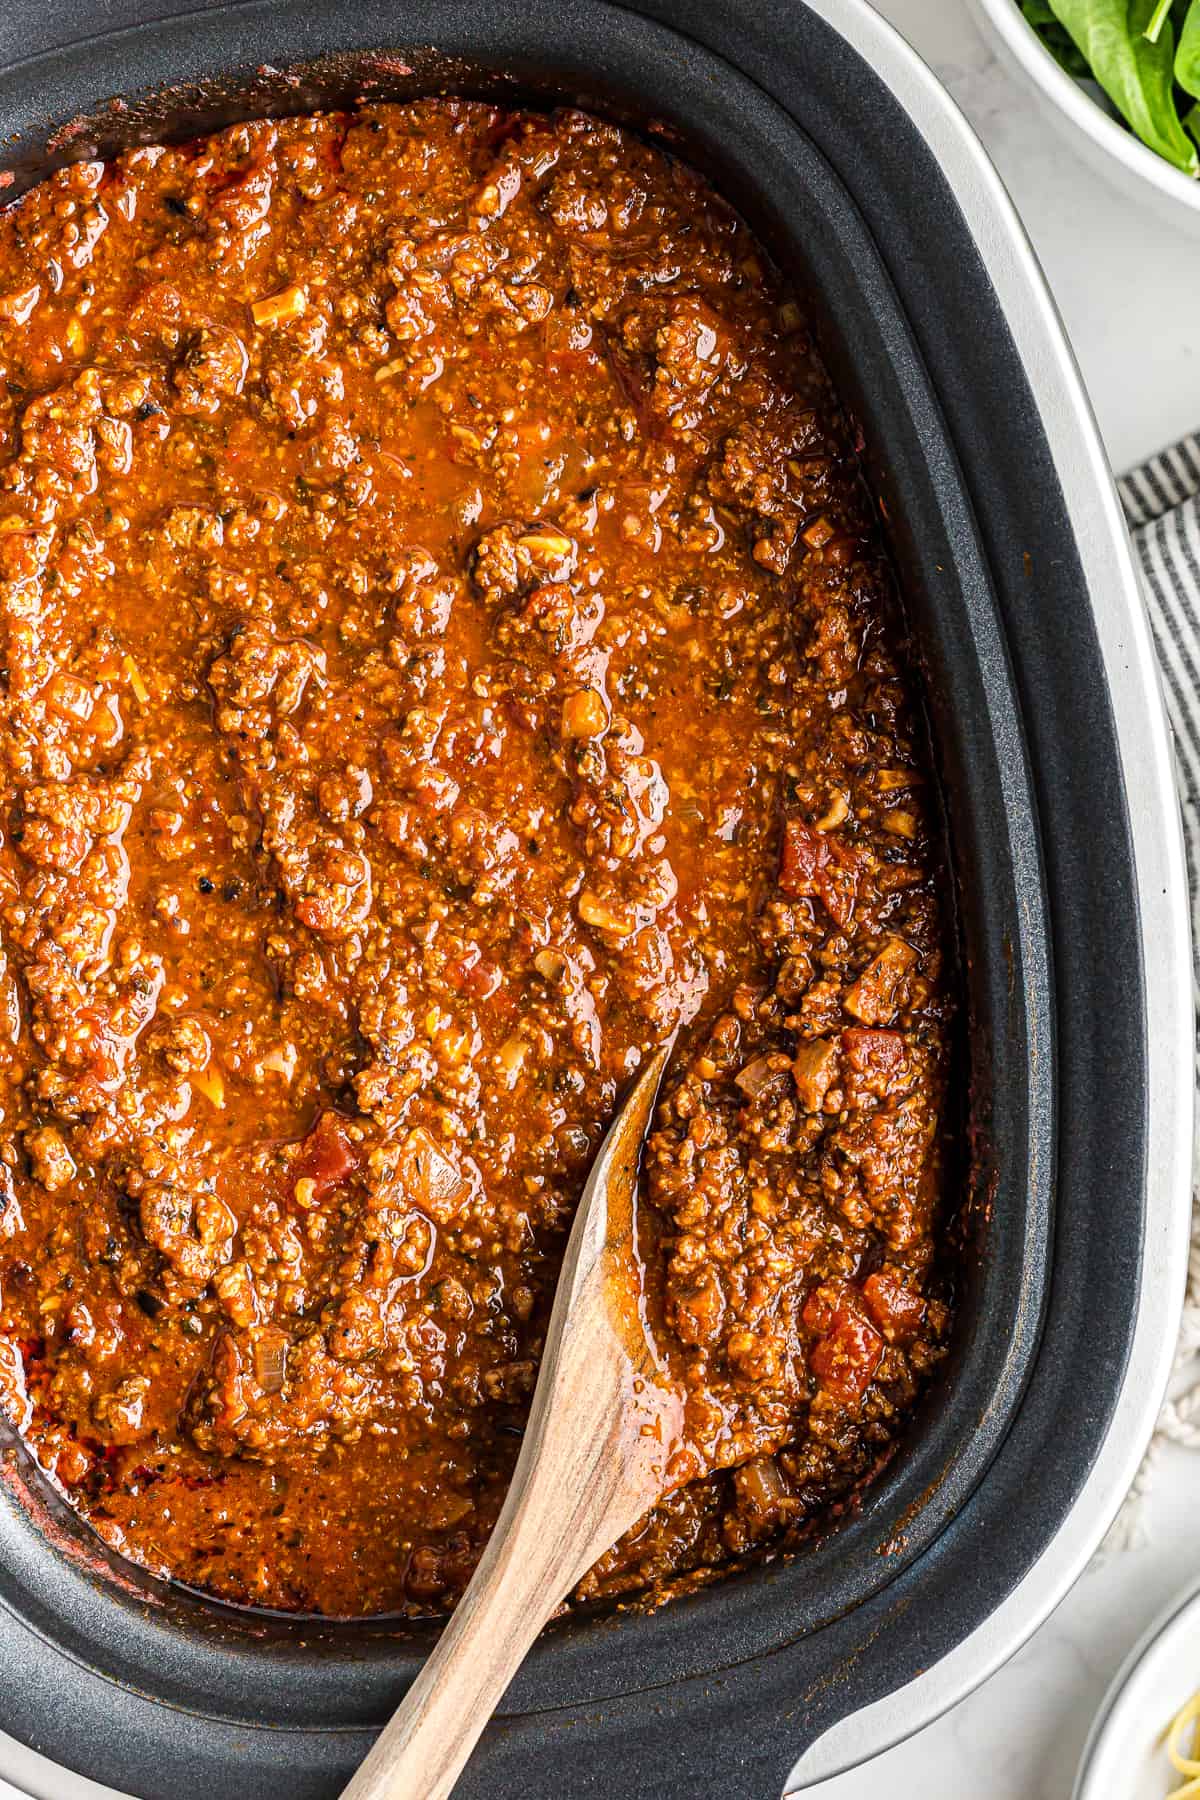 3 Amazing Slow Cooker Recipes-And A Slow Cooker Contest